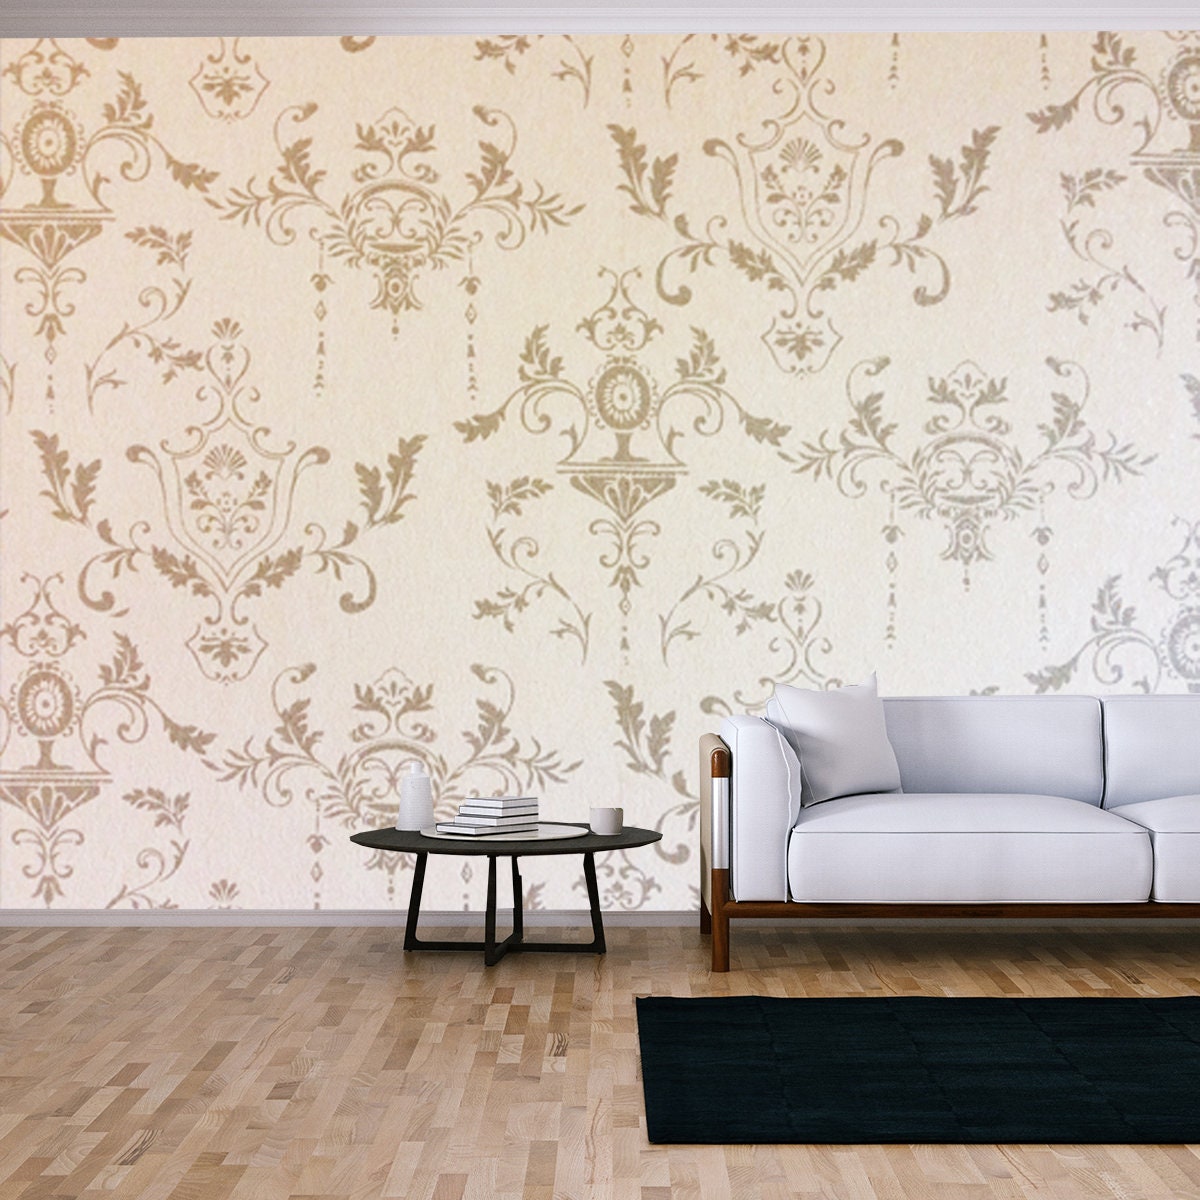 Great Retro Background of Some Old Dirty and Grungy Wallpaper Living Room Mural